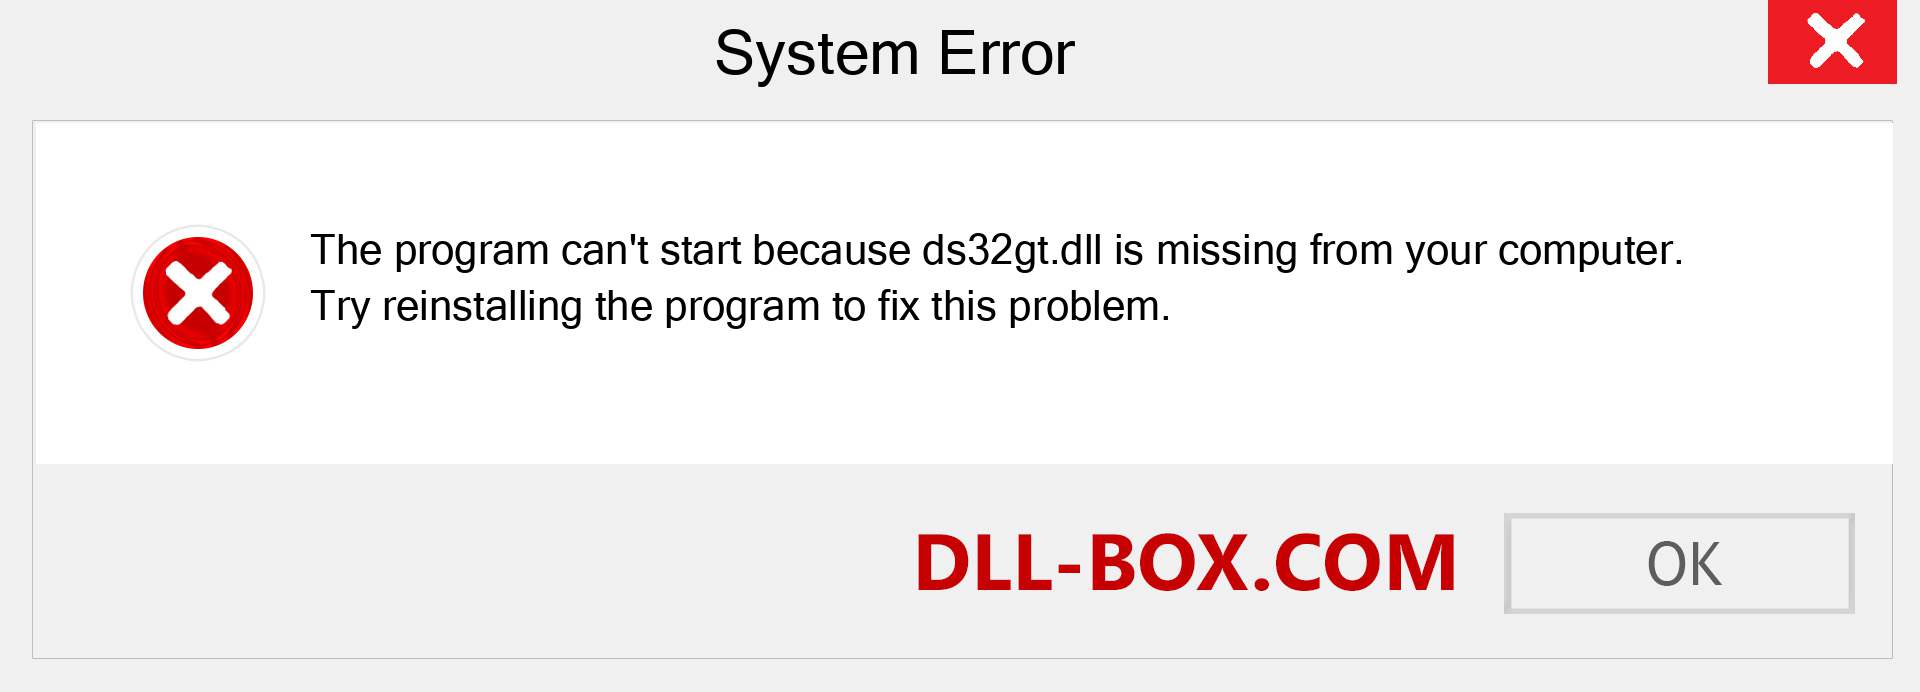  ds32gt.dll file is missing?. Download for Windows 7, 8, 10 - Fix  ds32gt dll Missing Error on Windows, photos, images